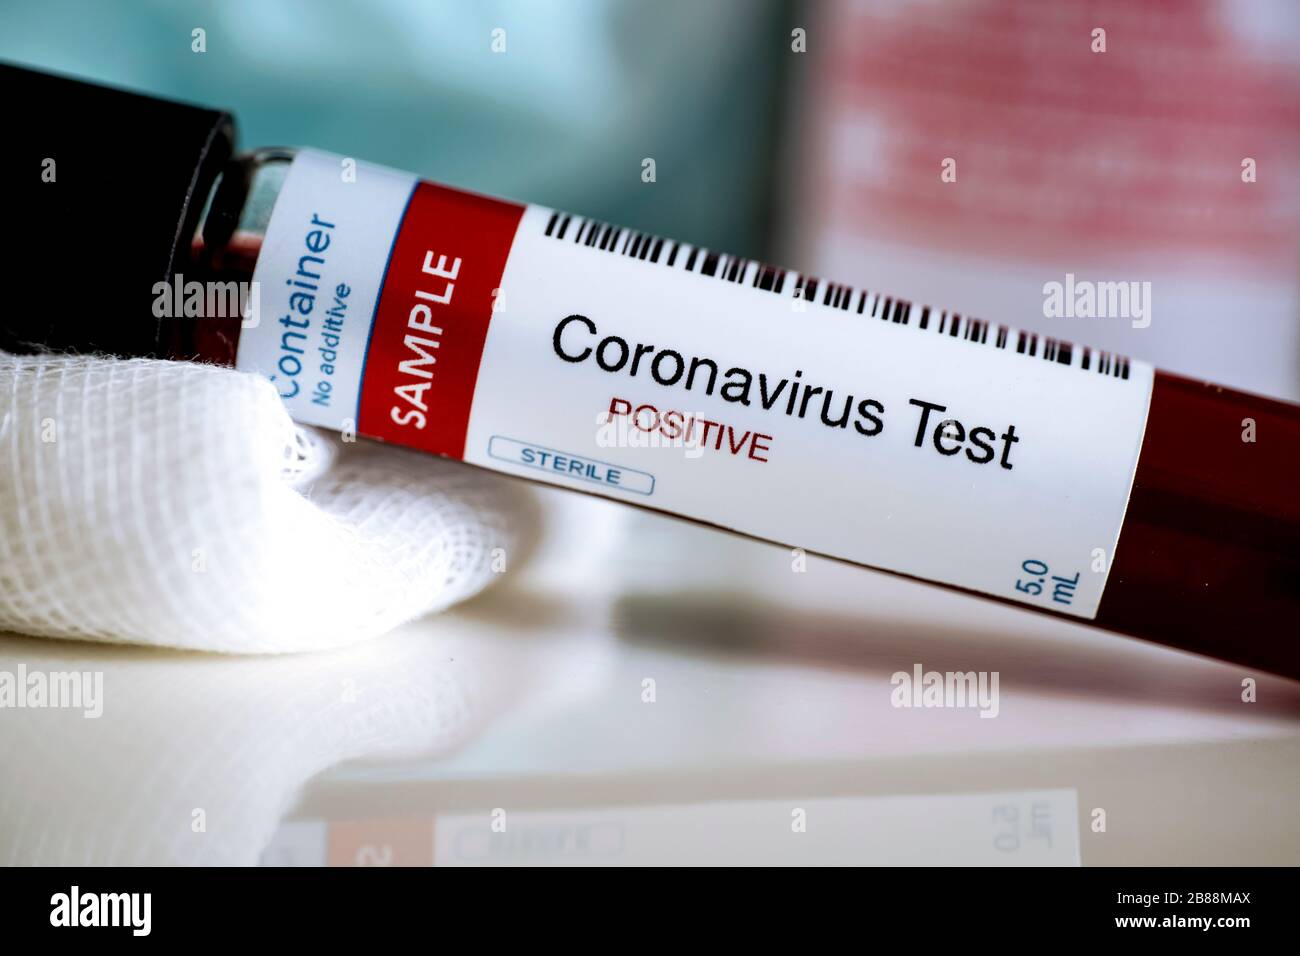 Blood test samples for presence of coronavirus (COVID-19) tube containing a blood sample that has tested positive for coronavirus. Stock Photo